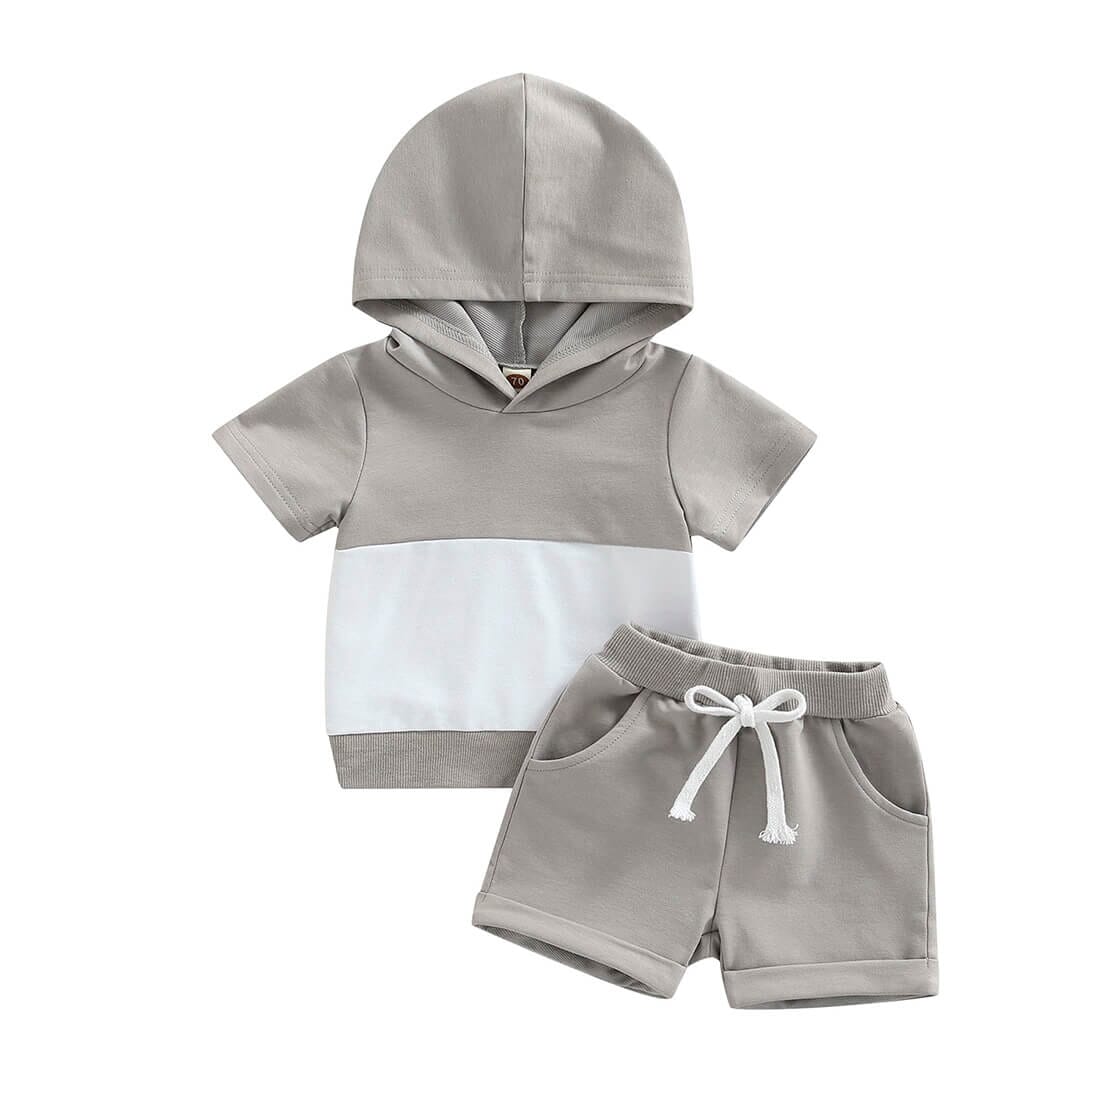 Solid Shorts Hooded Toddler Set Gray 9-12 M 